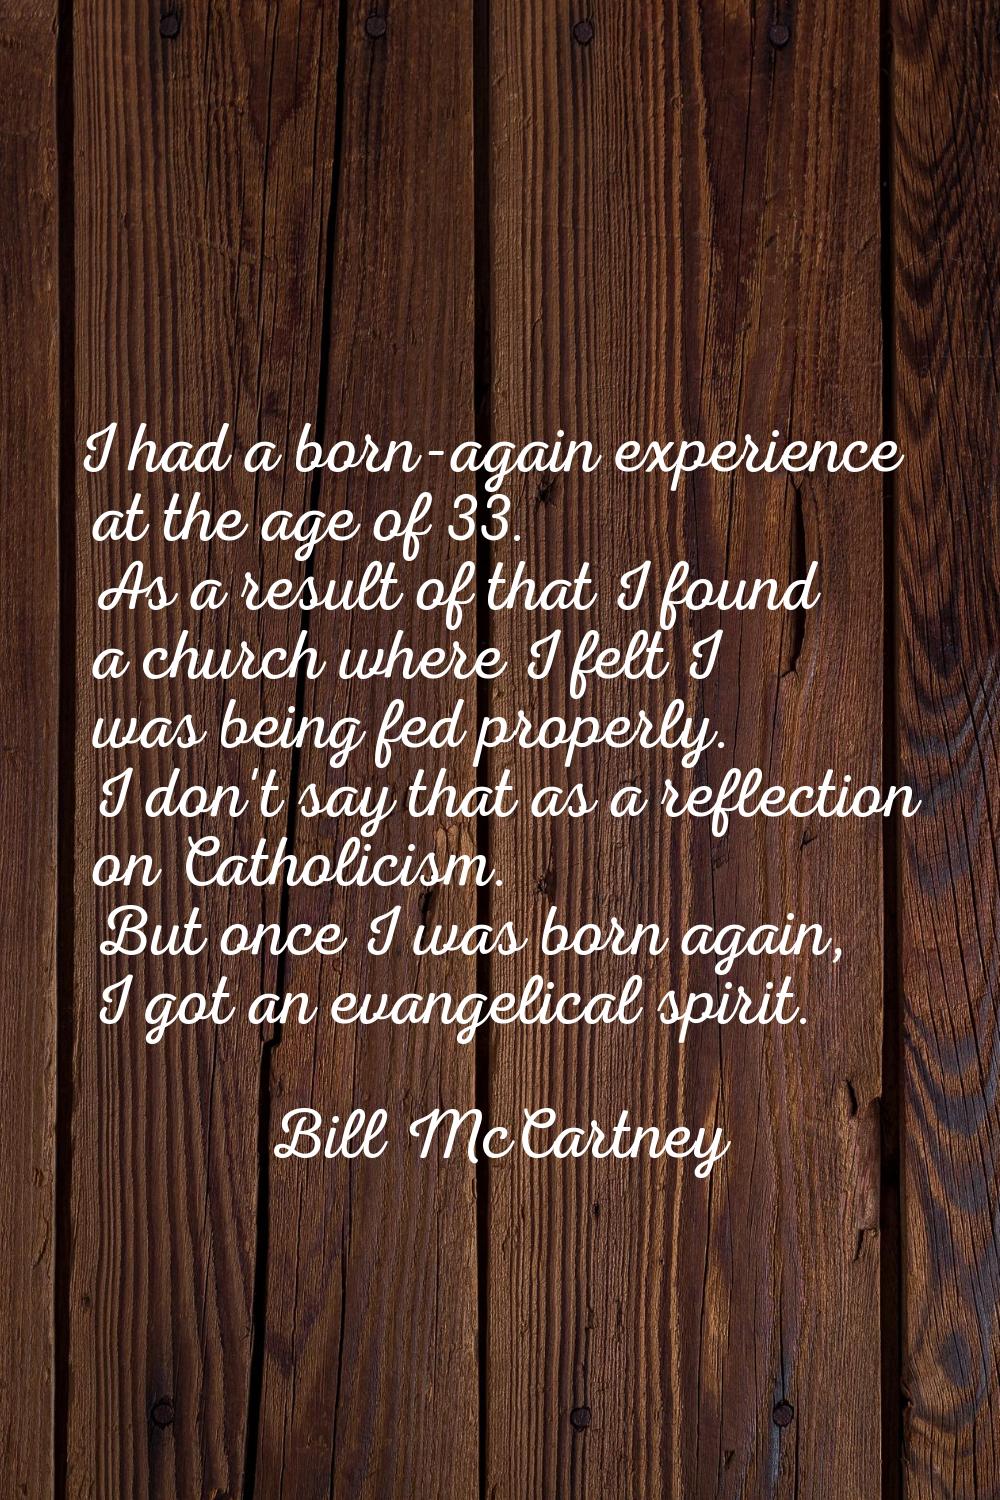 I had a born-again experience at the age of 33. As a result of that I found a church where I felt I